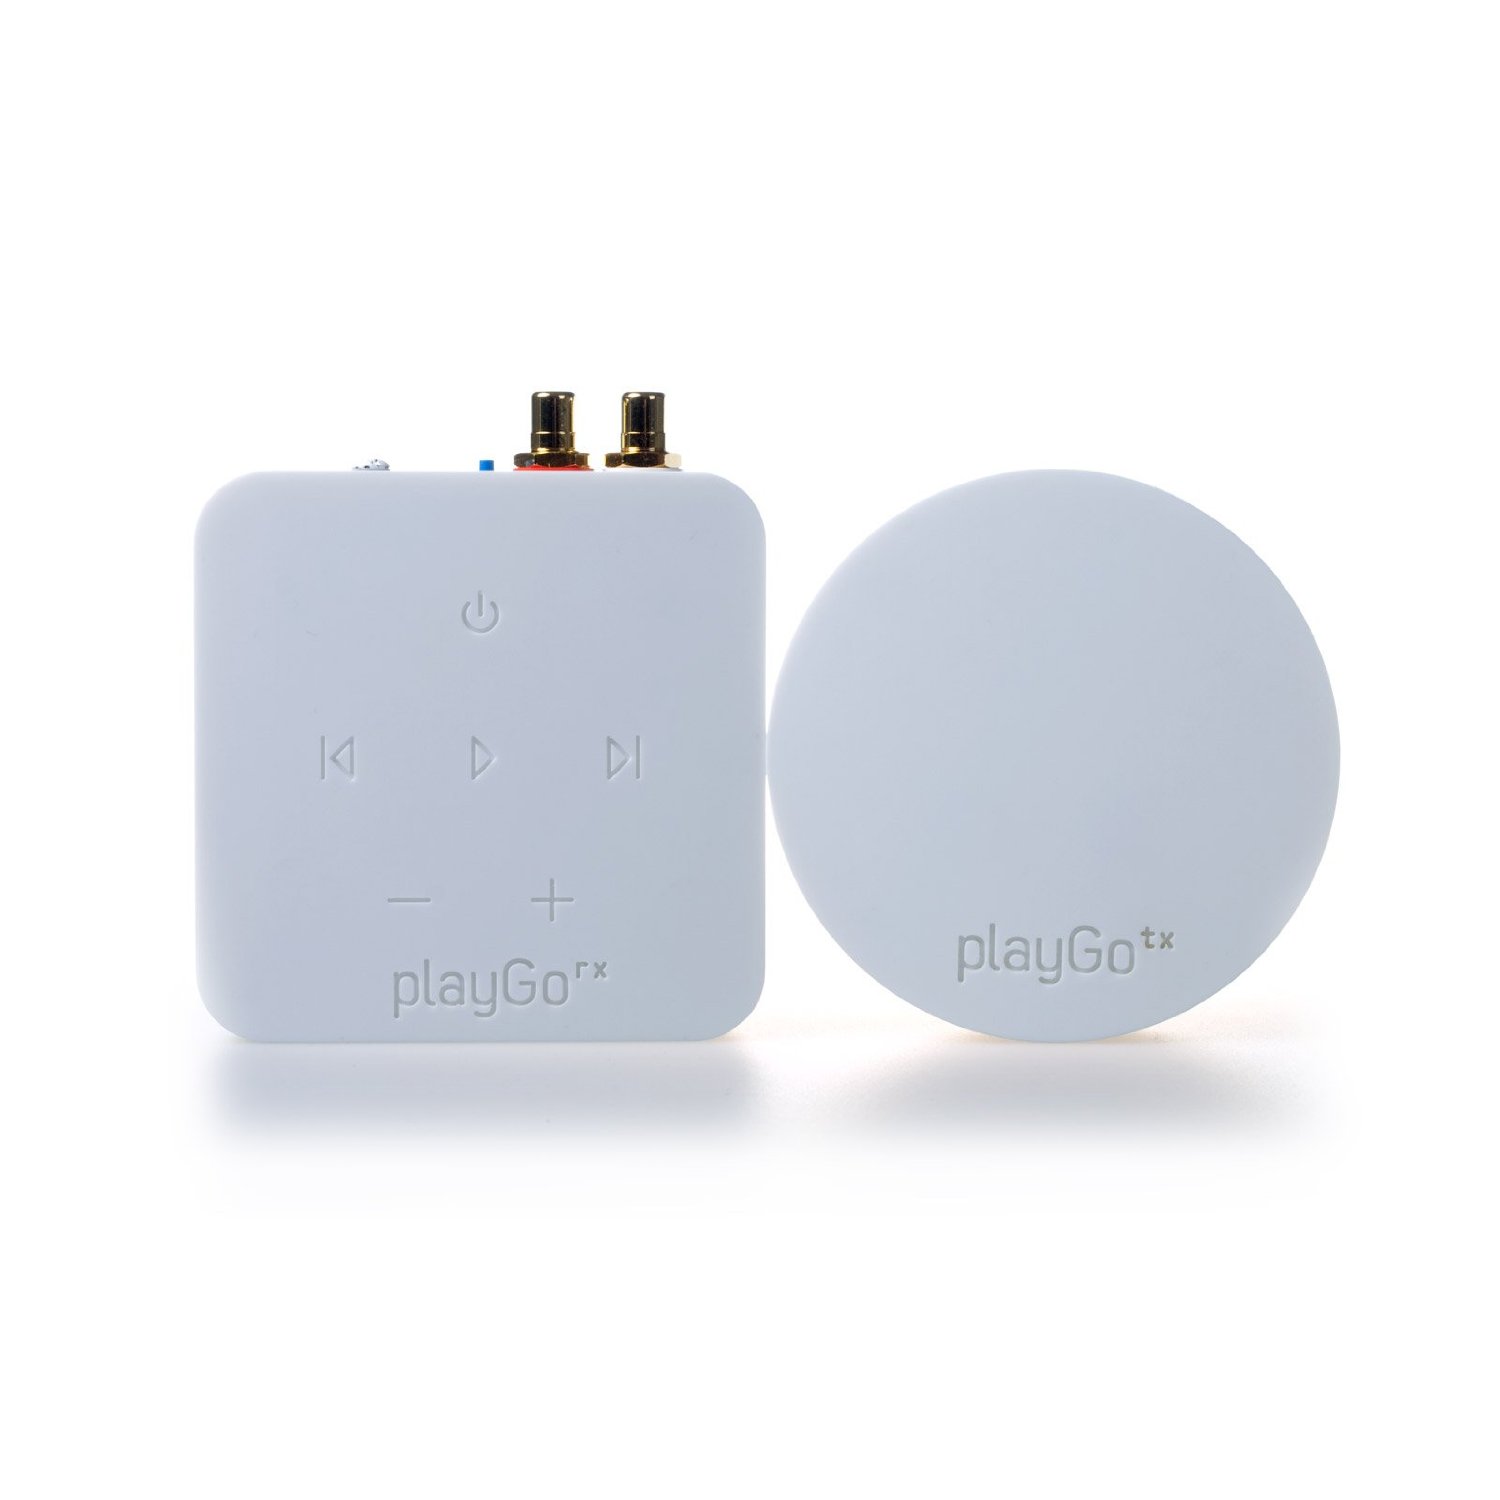 http://thetechjournal.com/wp-content/uploads/images/1108/1314328065-playgo-usb-wirelessly-connects-computer-and-stereo-2.jpg